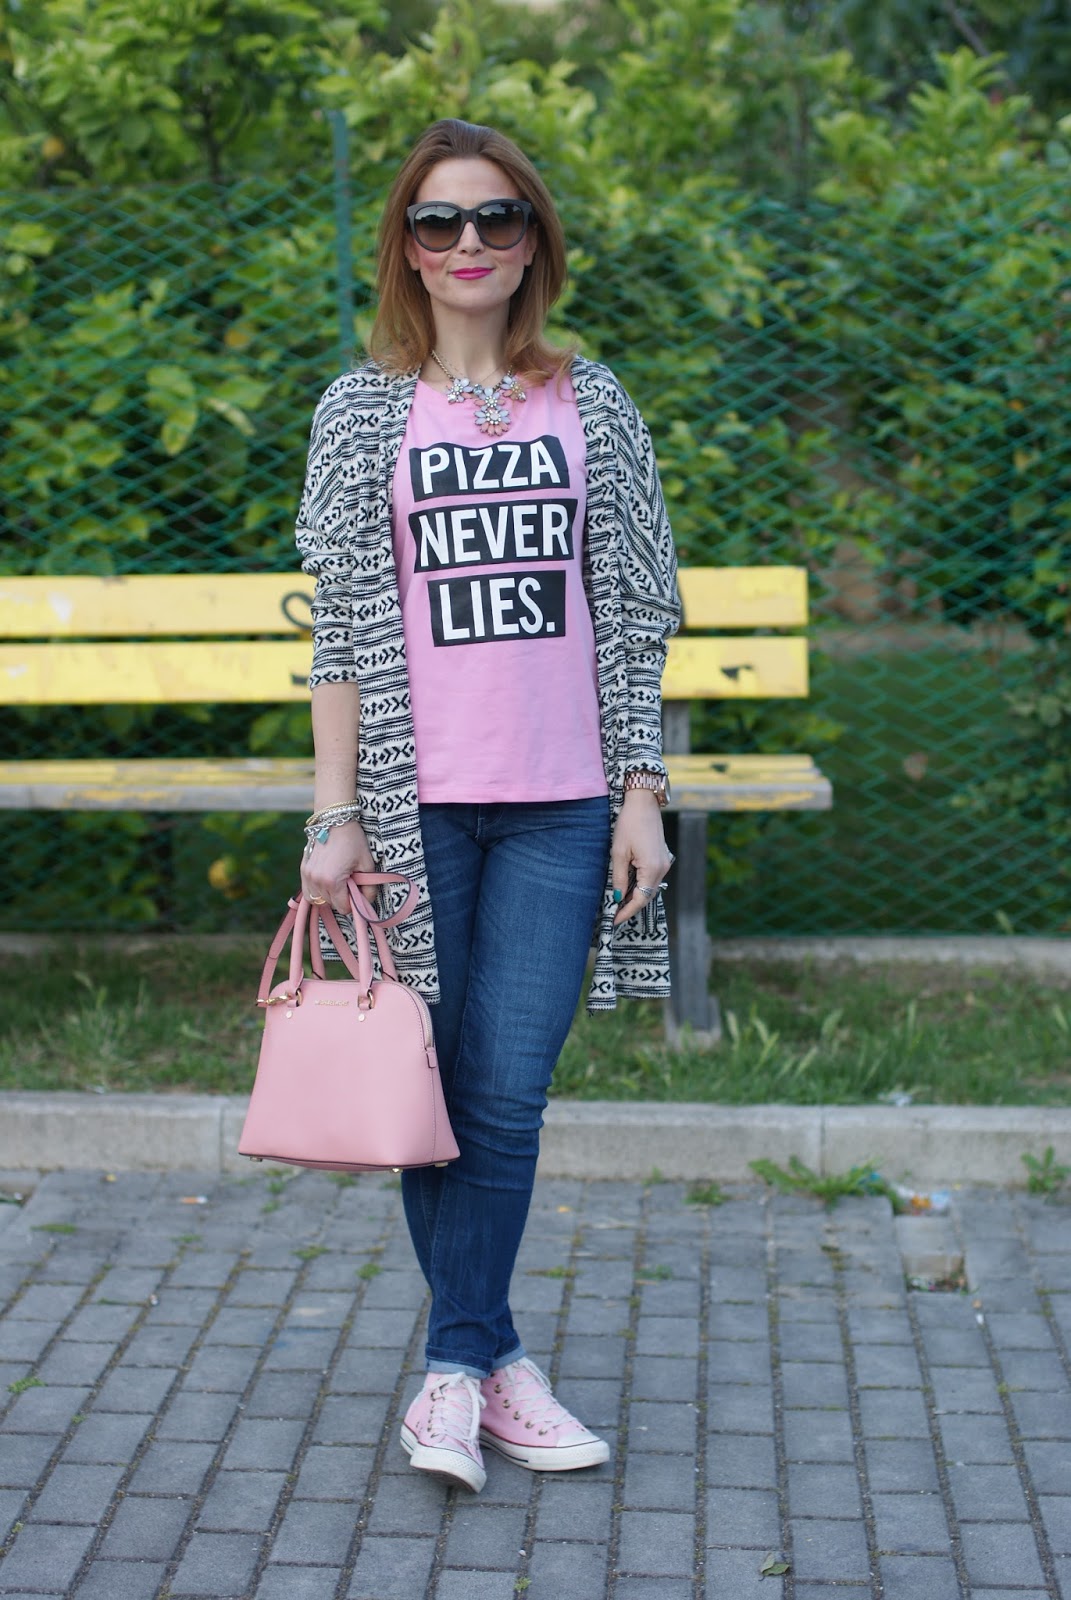 Pizza never lies, Zaful pink t-shirt, Zaful pizza never lies, casual pink look on Fashion and Cookies fashion blog, fashion blogger style